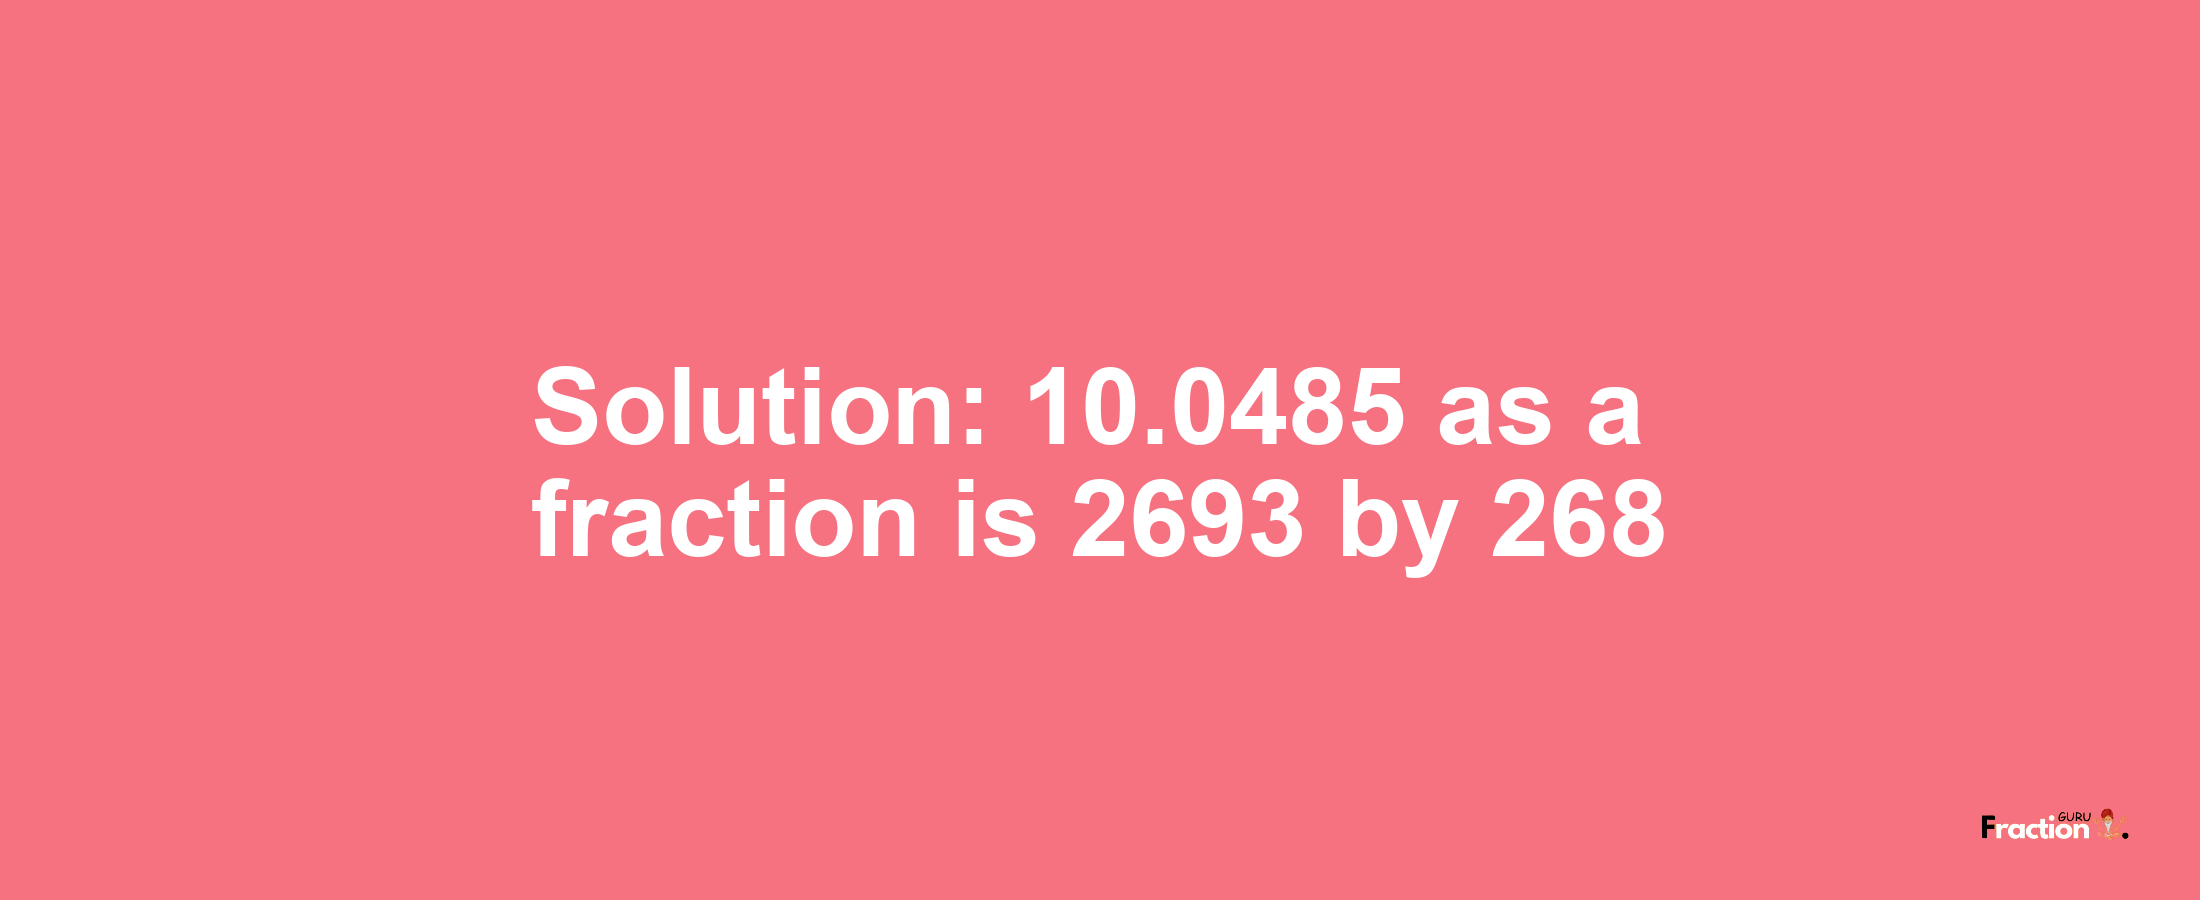 Solution:10.0485 as a fraction is 2693/268